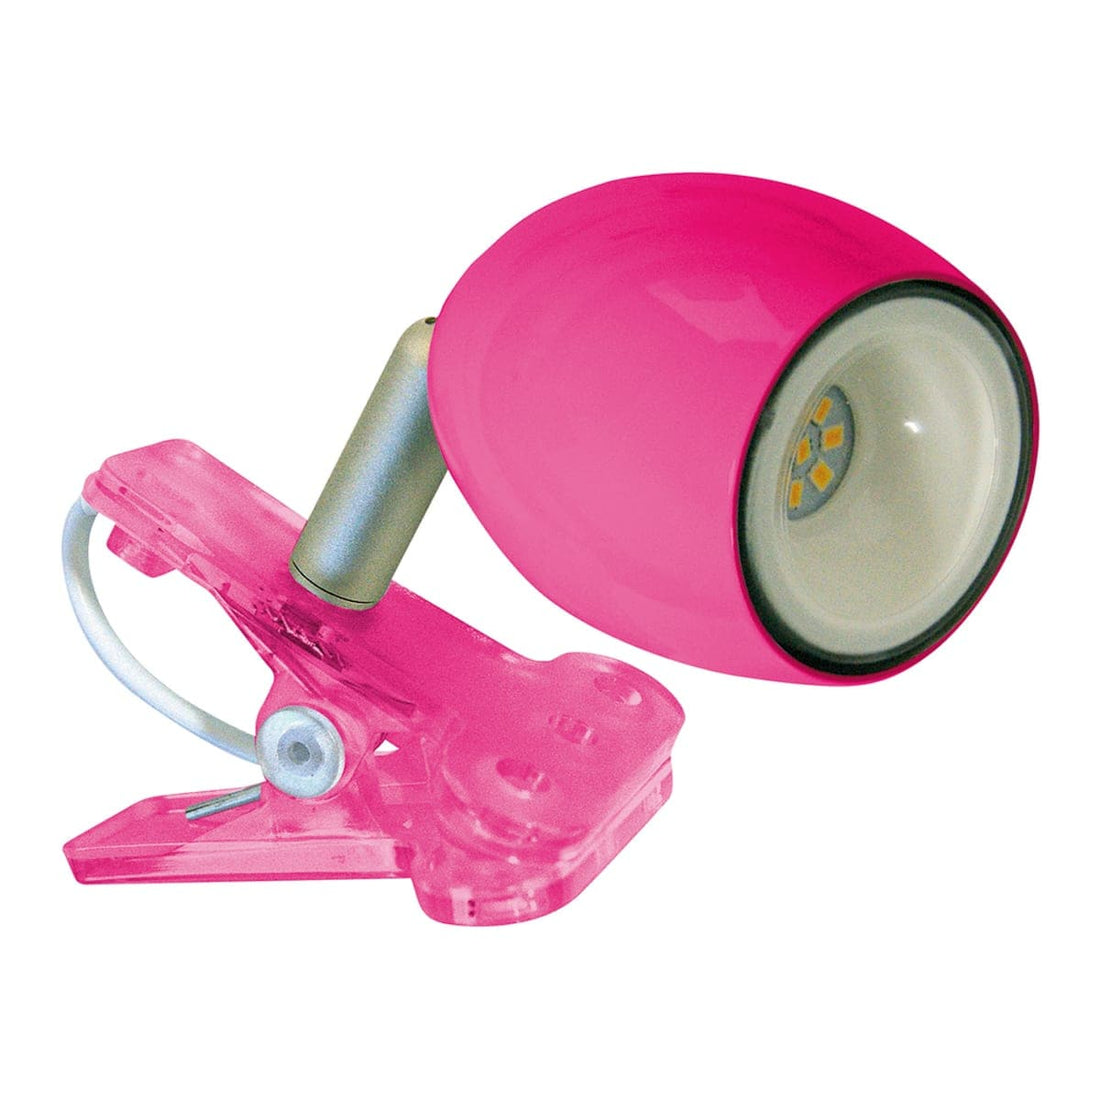 KIKILED STUDIO LAMP PINK STEEL LED 2W WITH CLAMP - best price from Maltashopper.com BR420005827